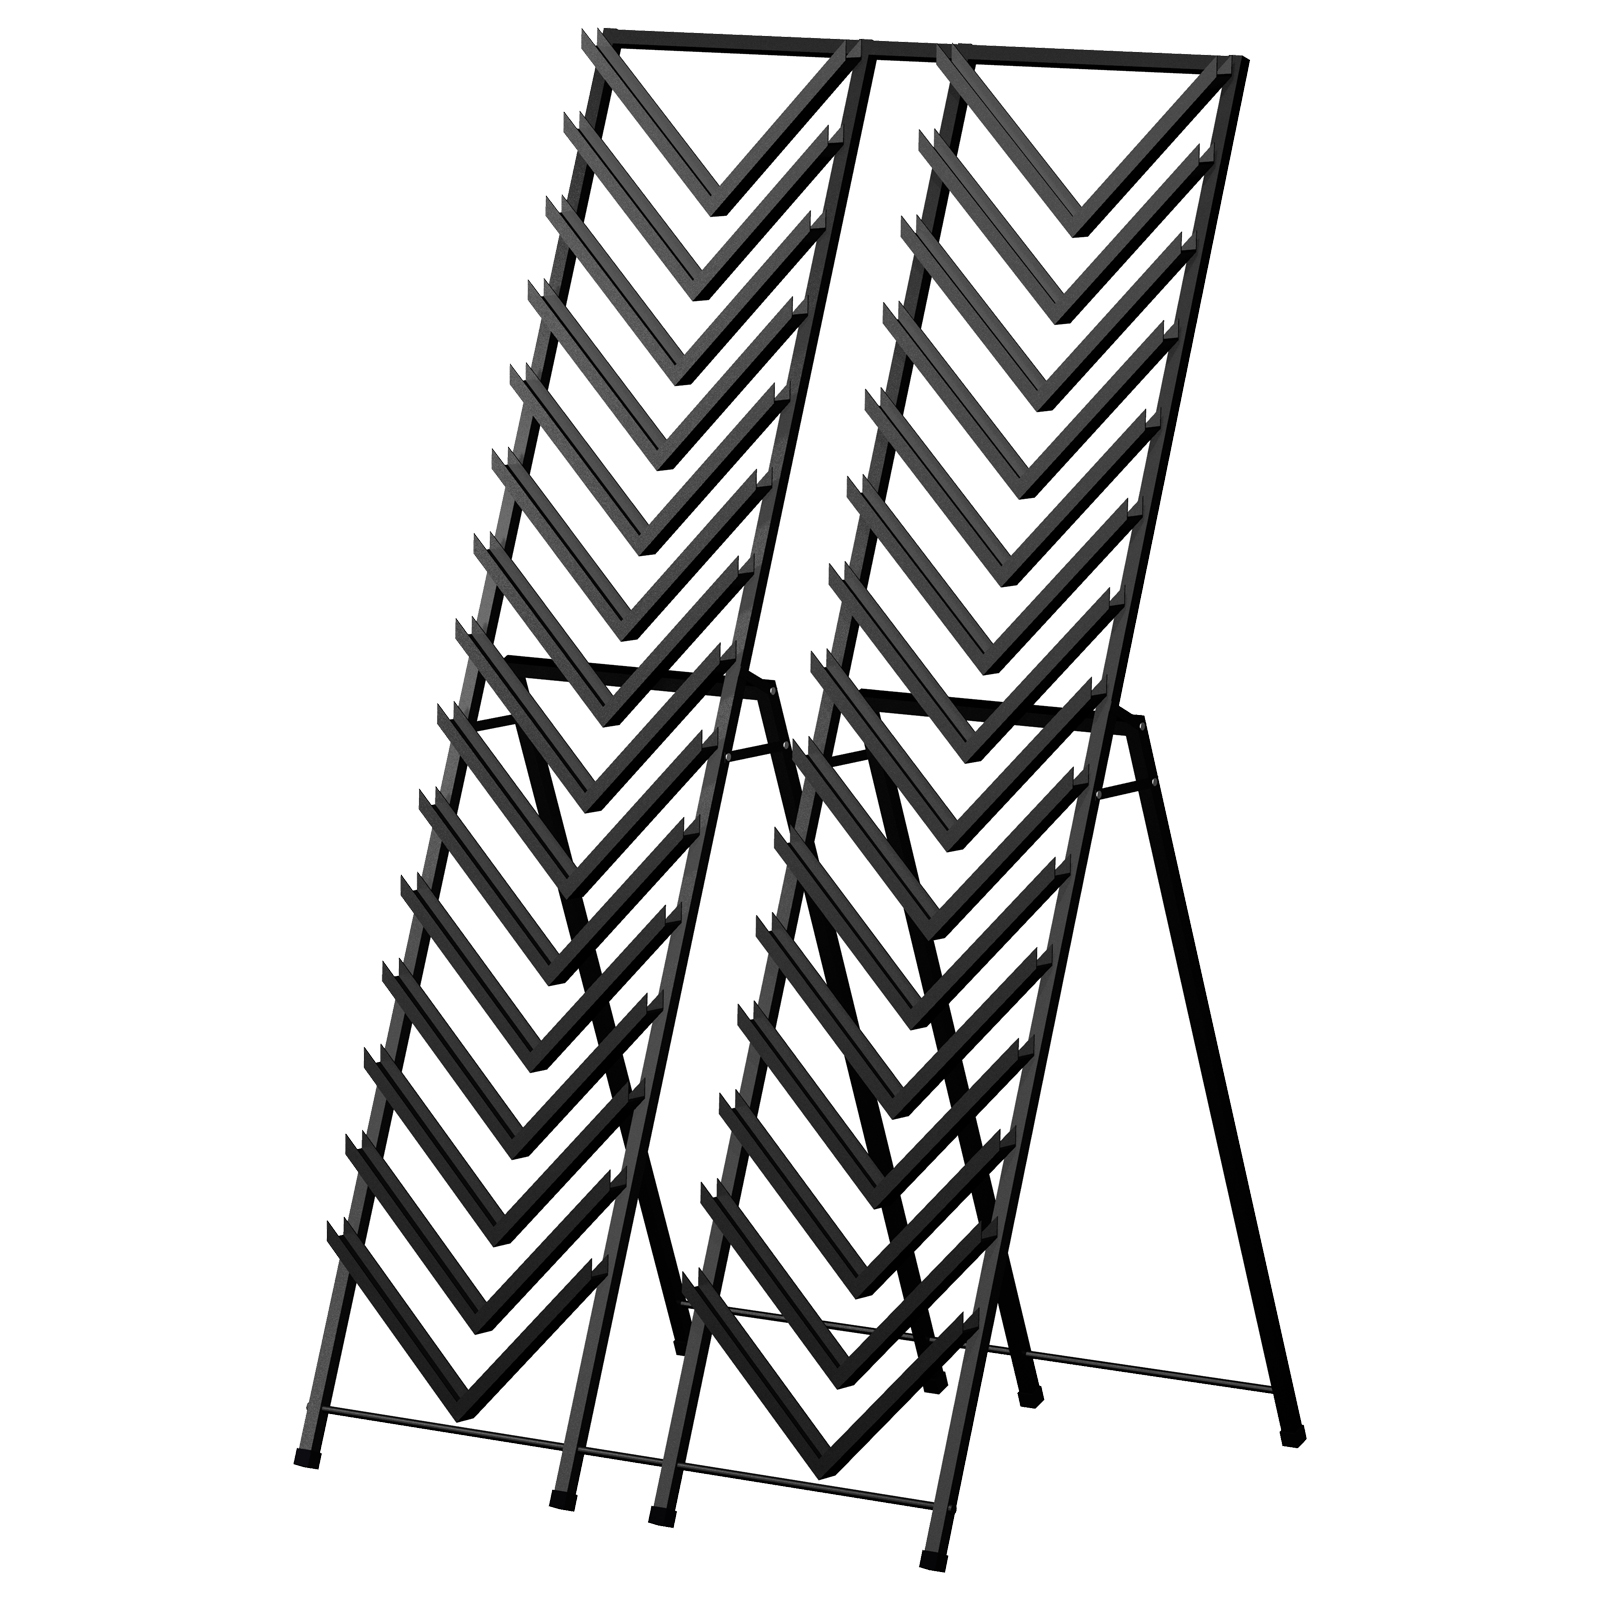 D30 Easel A-Frame Tower Sturdy Steel Double Front Load Ceramic Tile Stone Marble Channel System Showroom Display